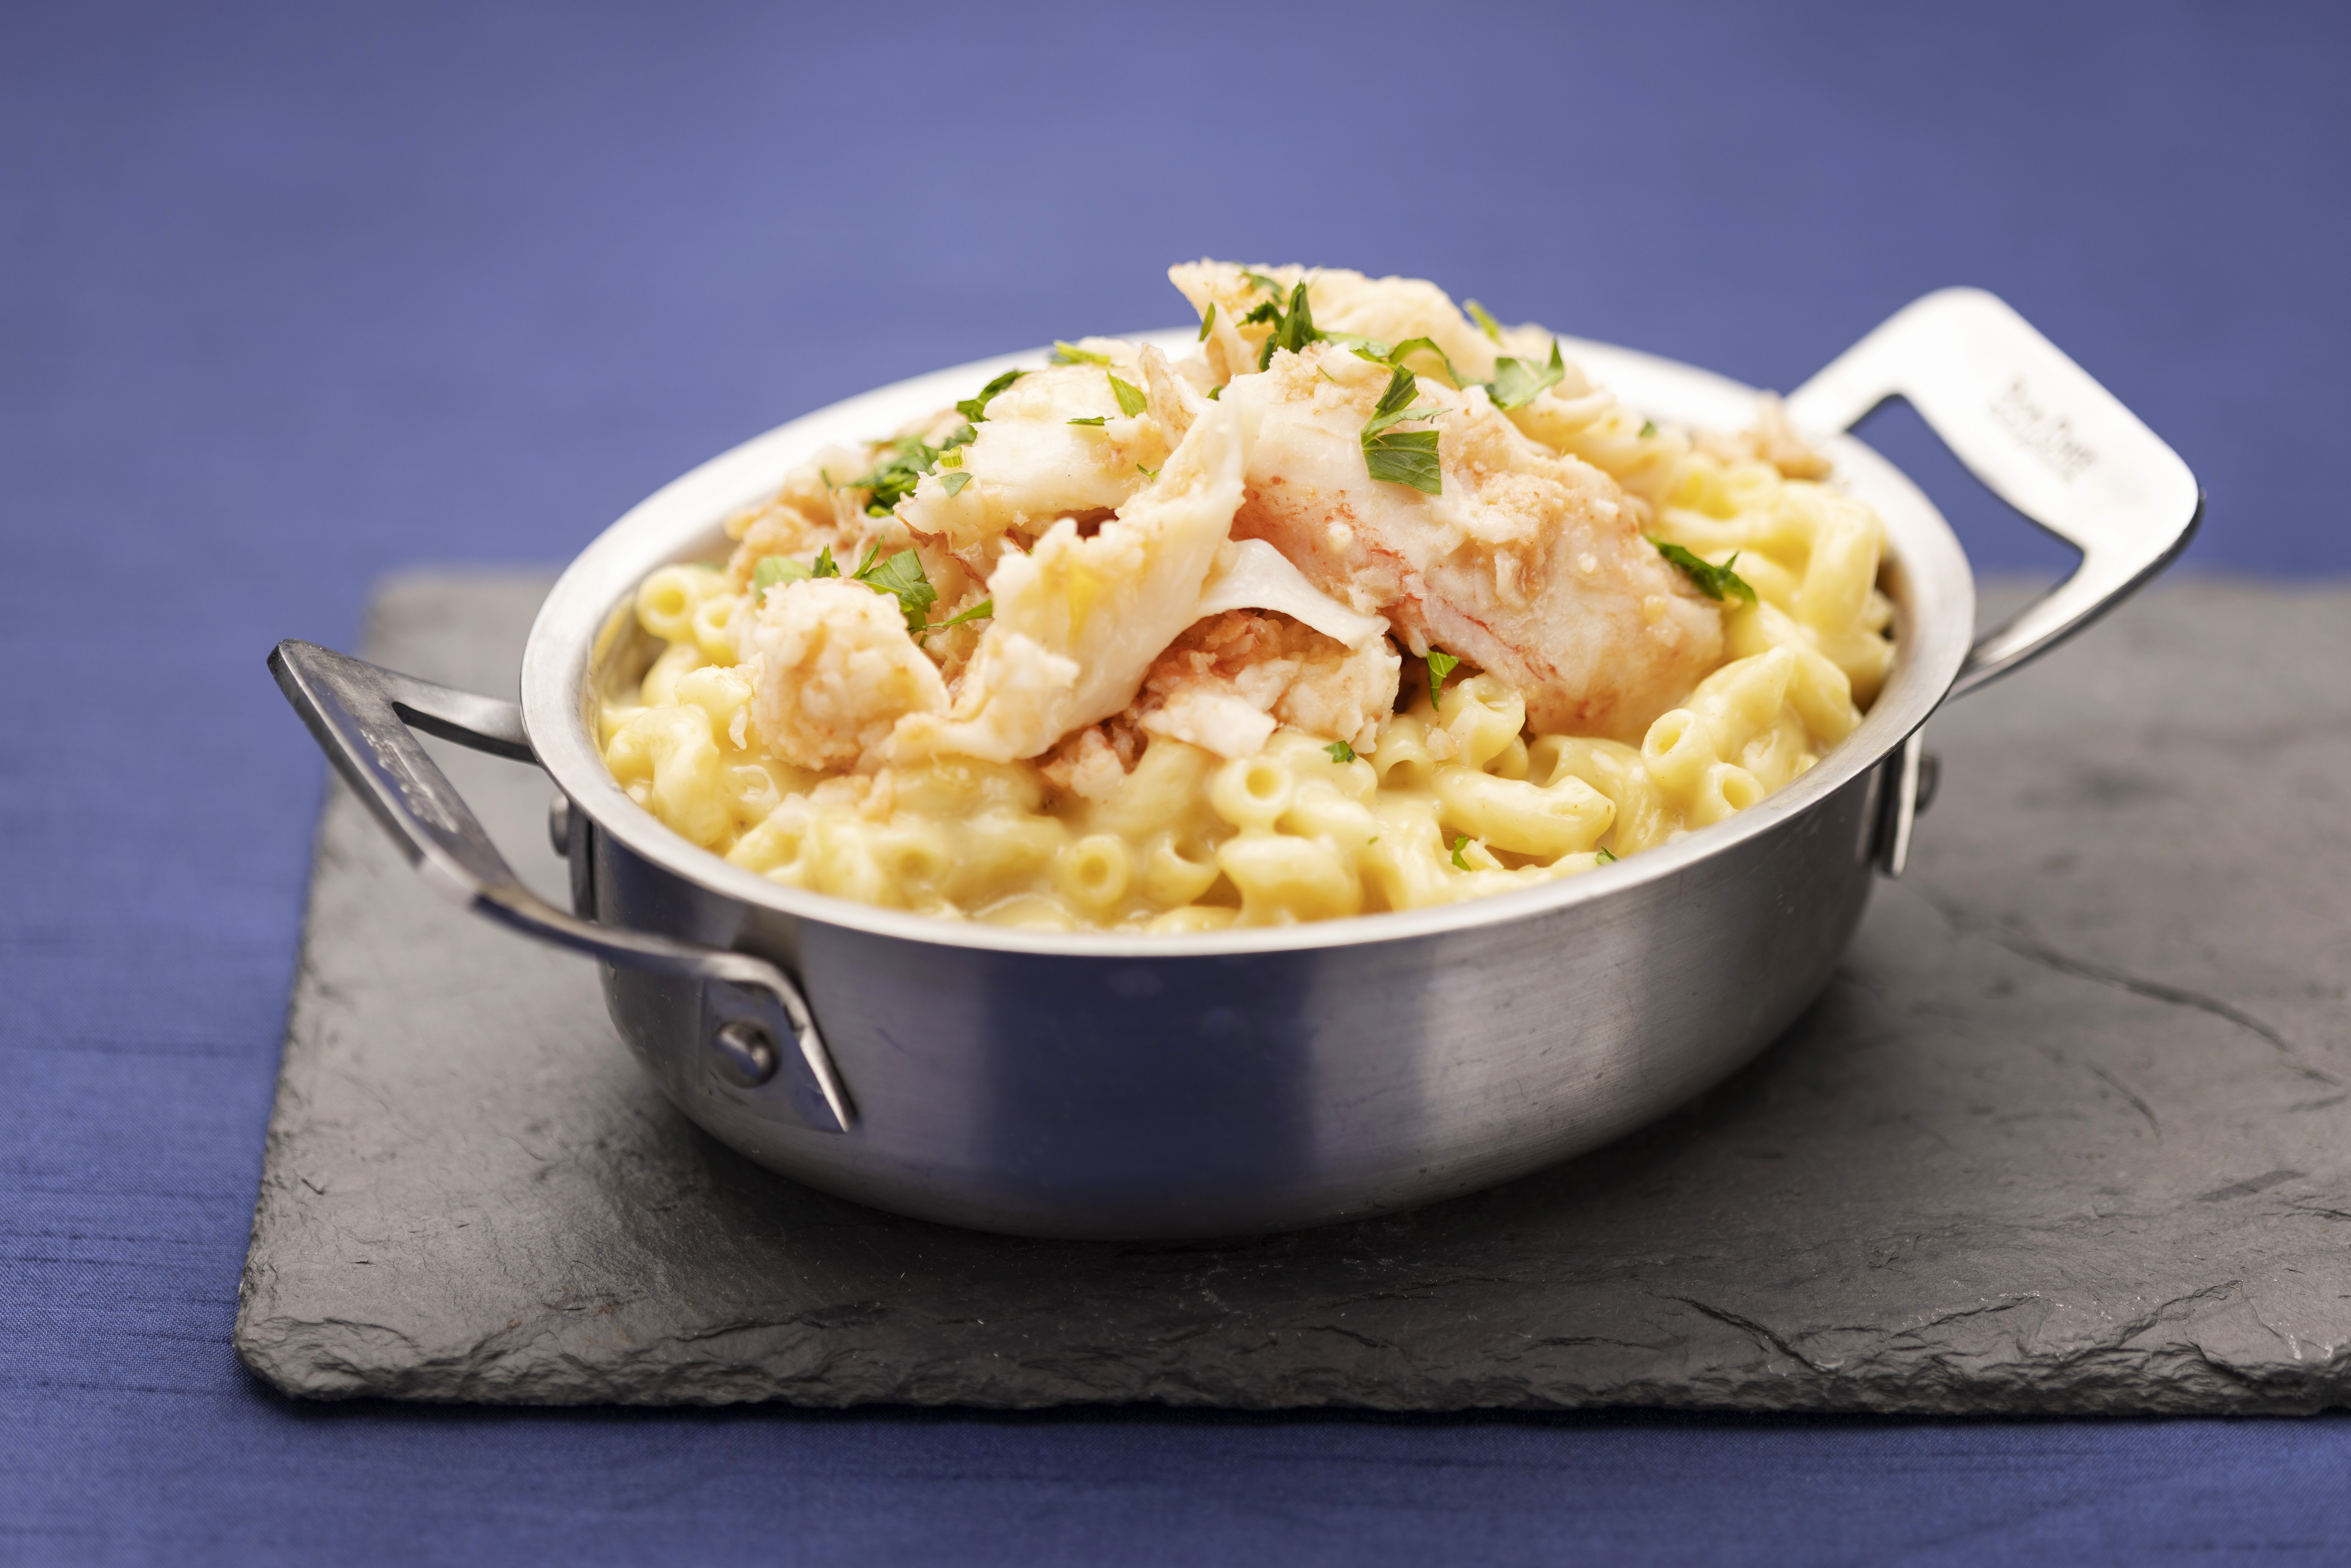 In a silver serving pot, mac and cheese is topped with chunks of lobster and herbs.